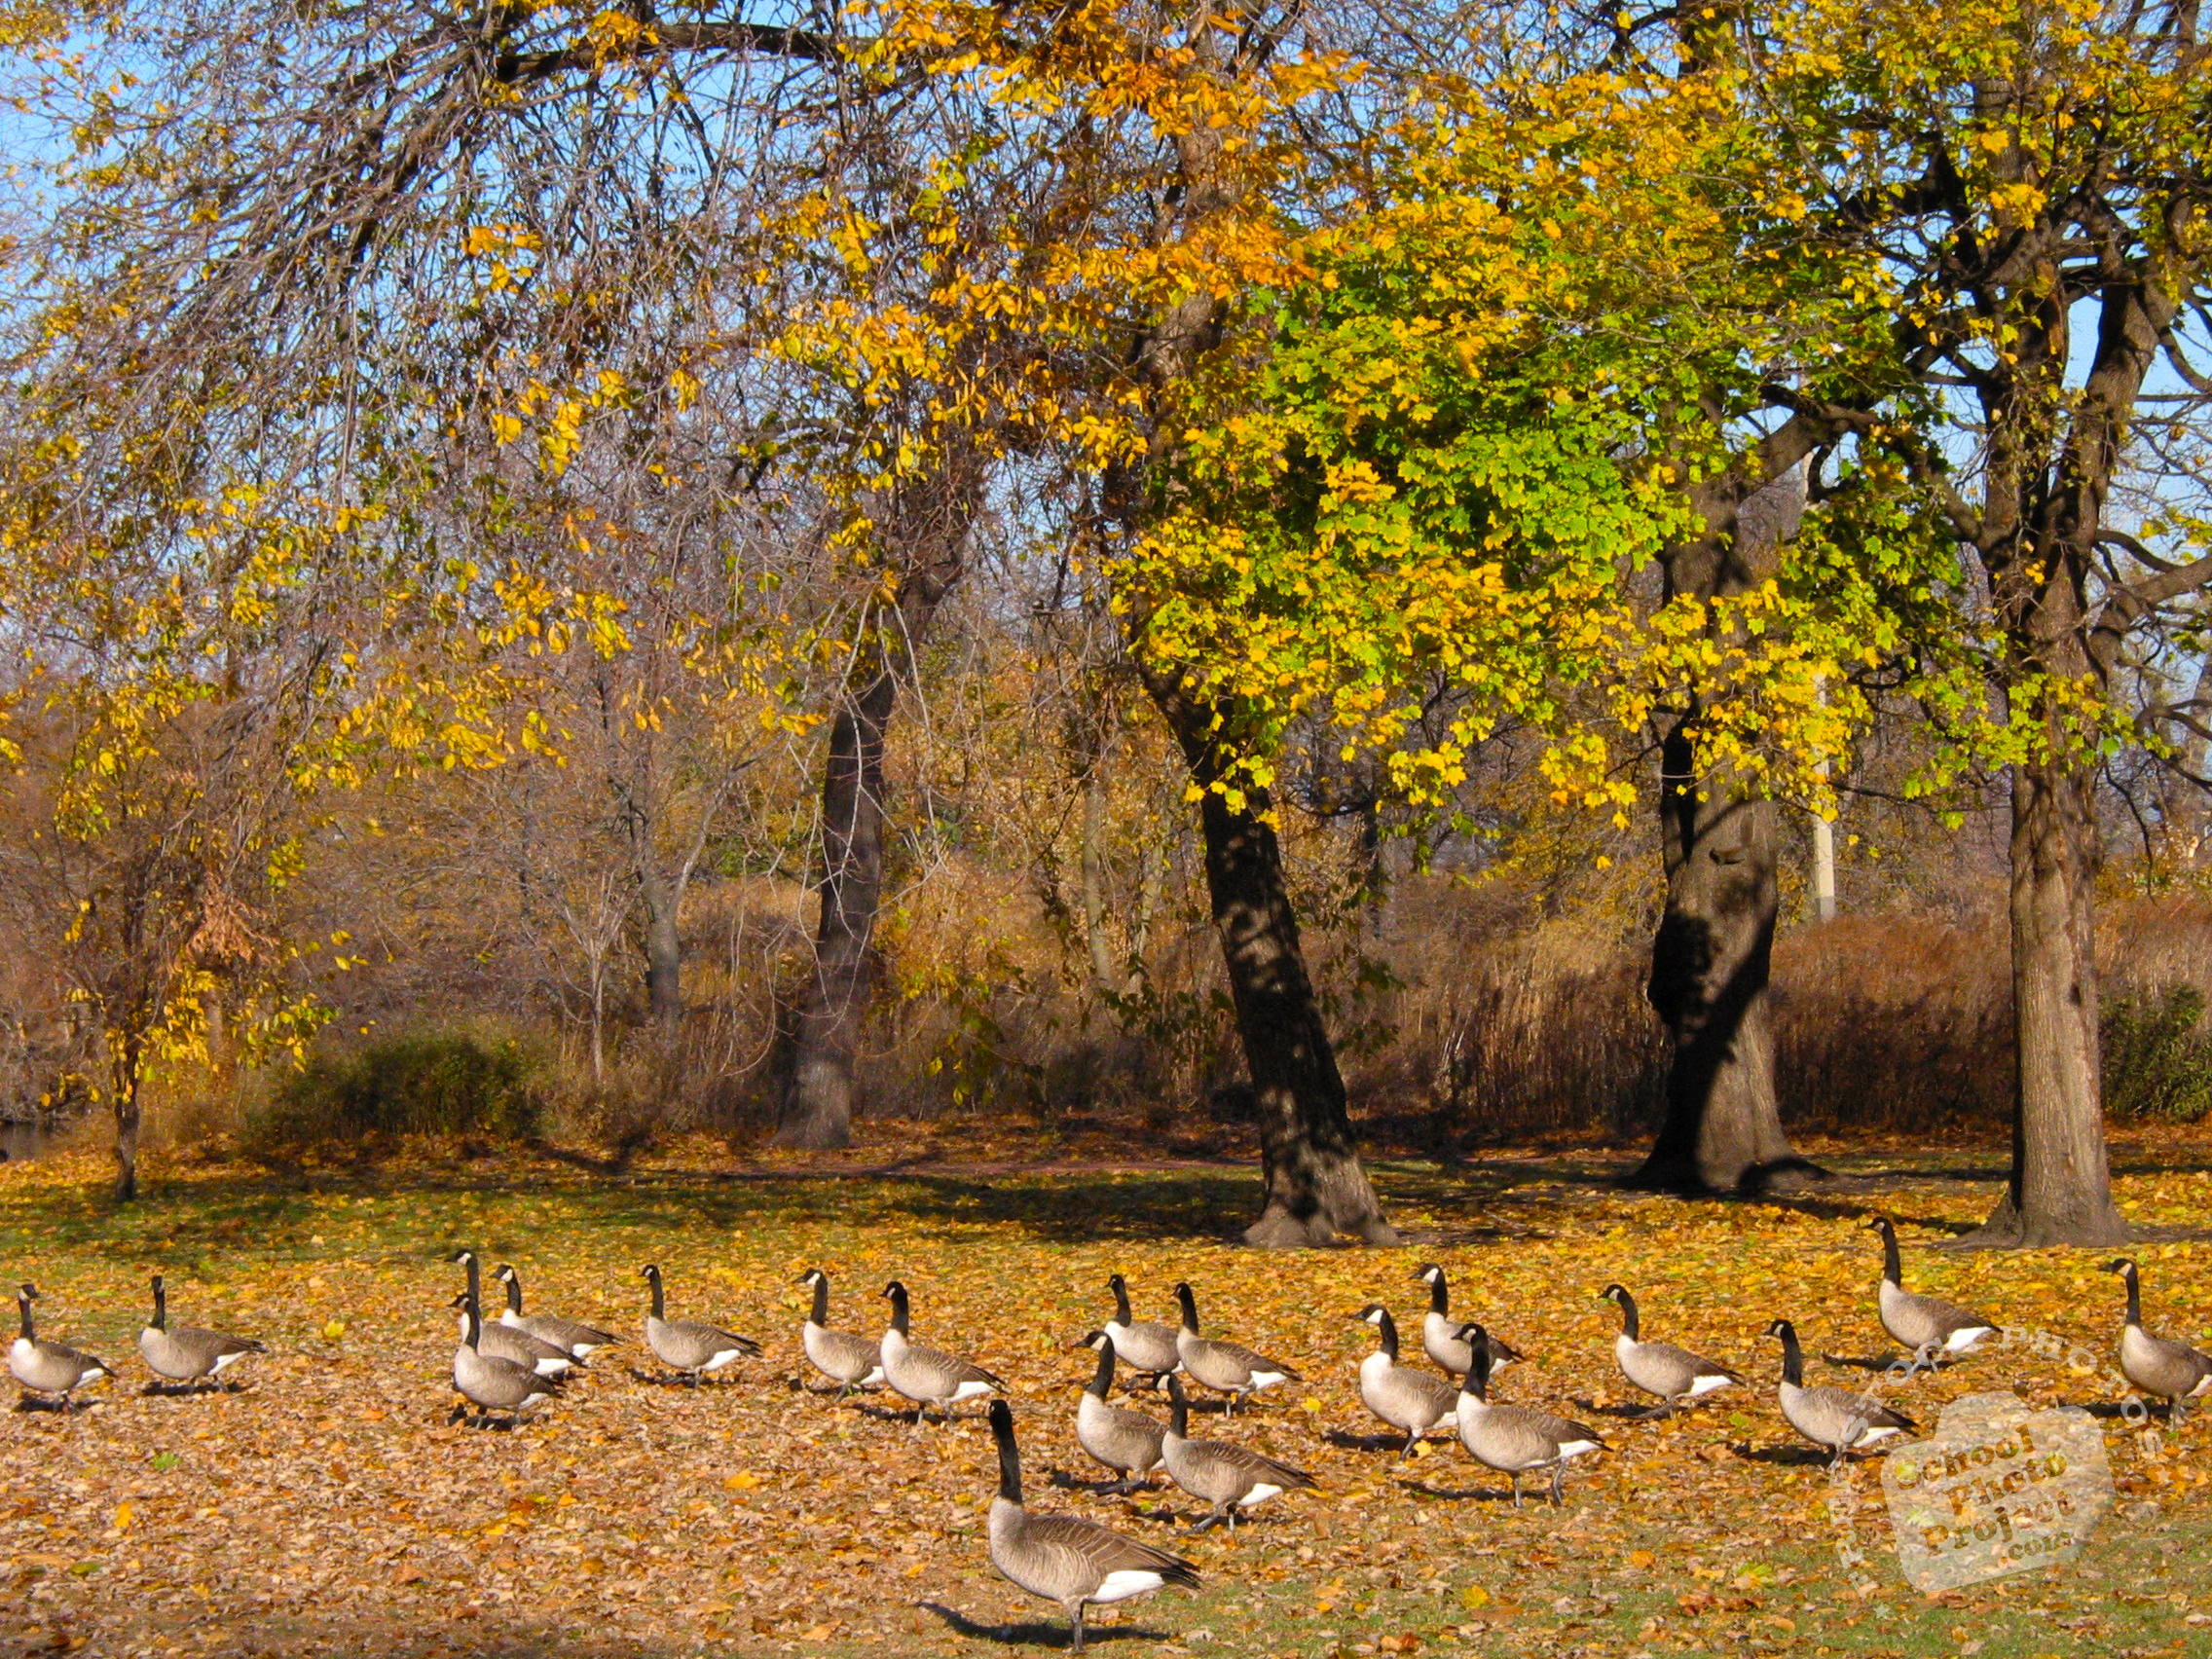 FREE Wild Canadian Geese Photo, Fall Foliage Picture, Autumn Panorama